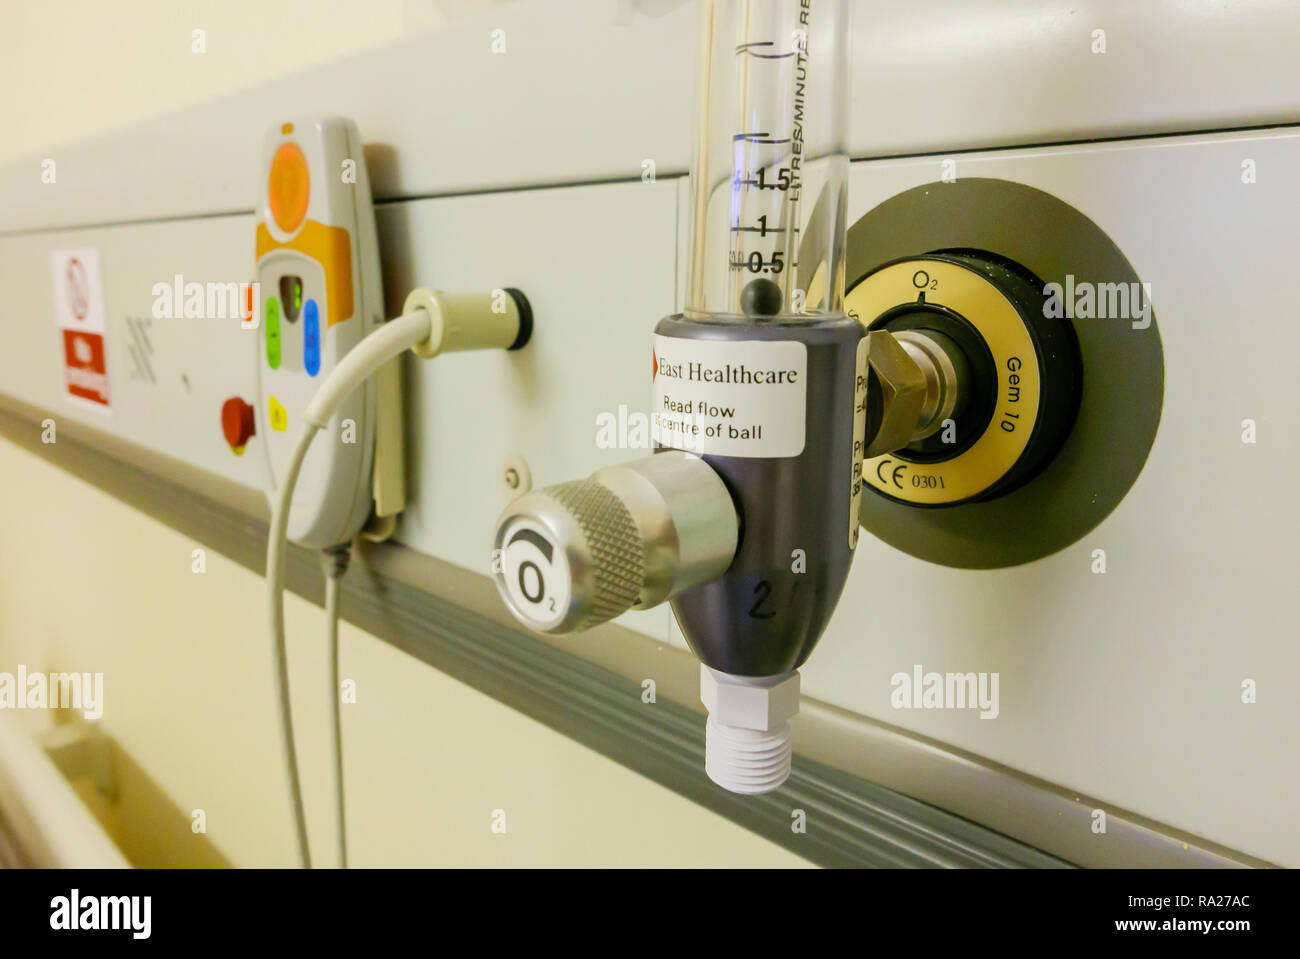 Bed head unit in a hospital ward showing an oxygen supply and a nurses call bell. Stock Photo